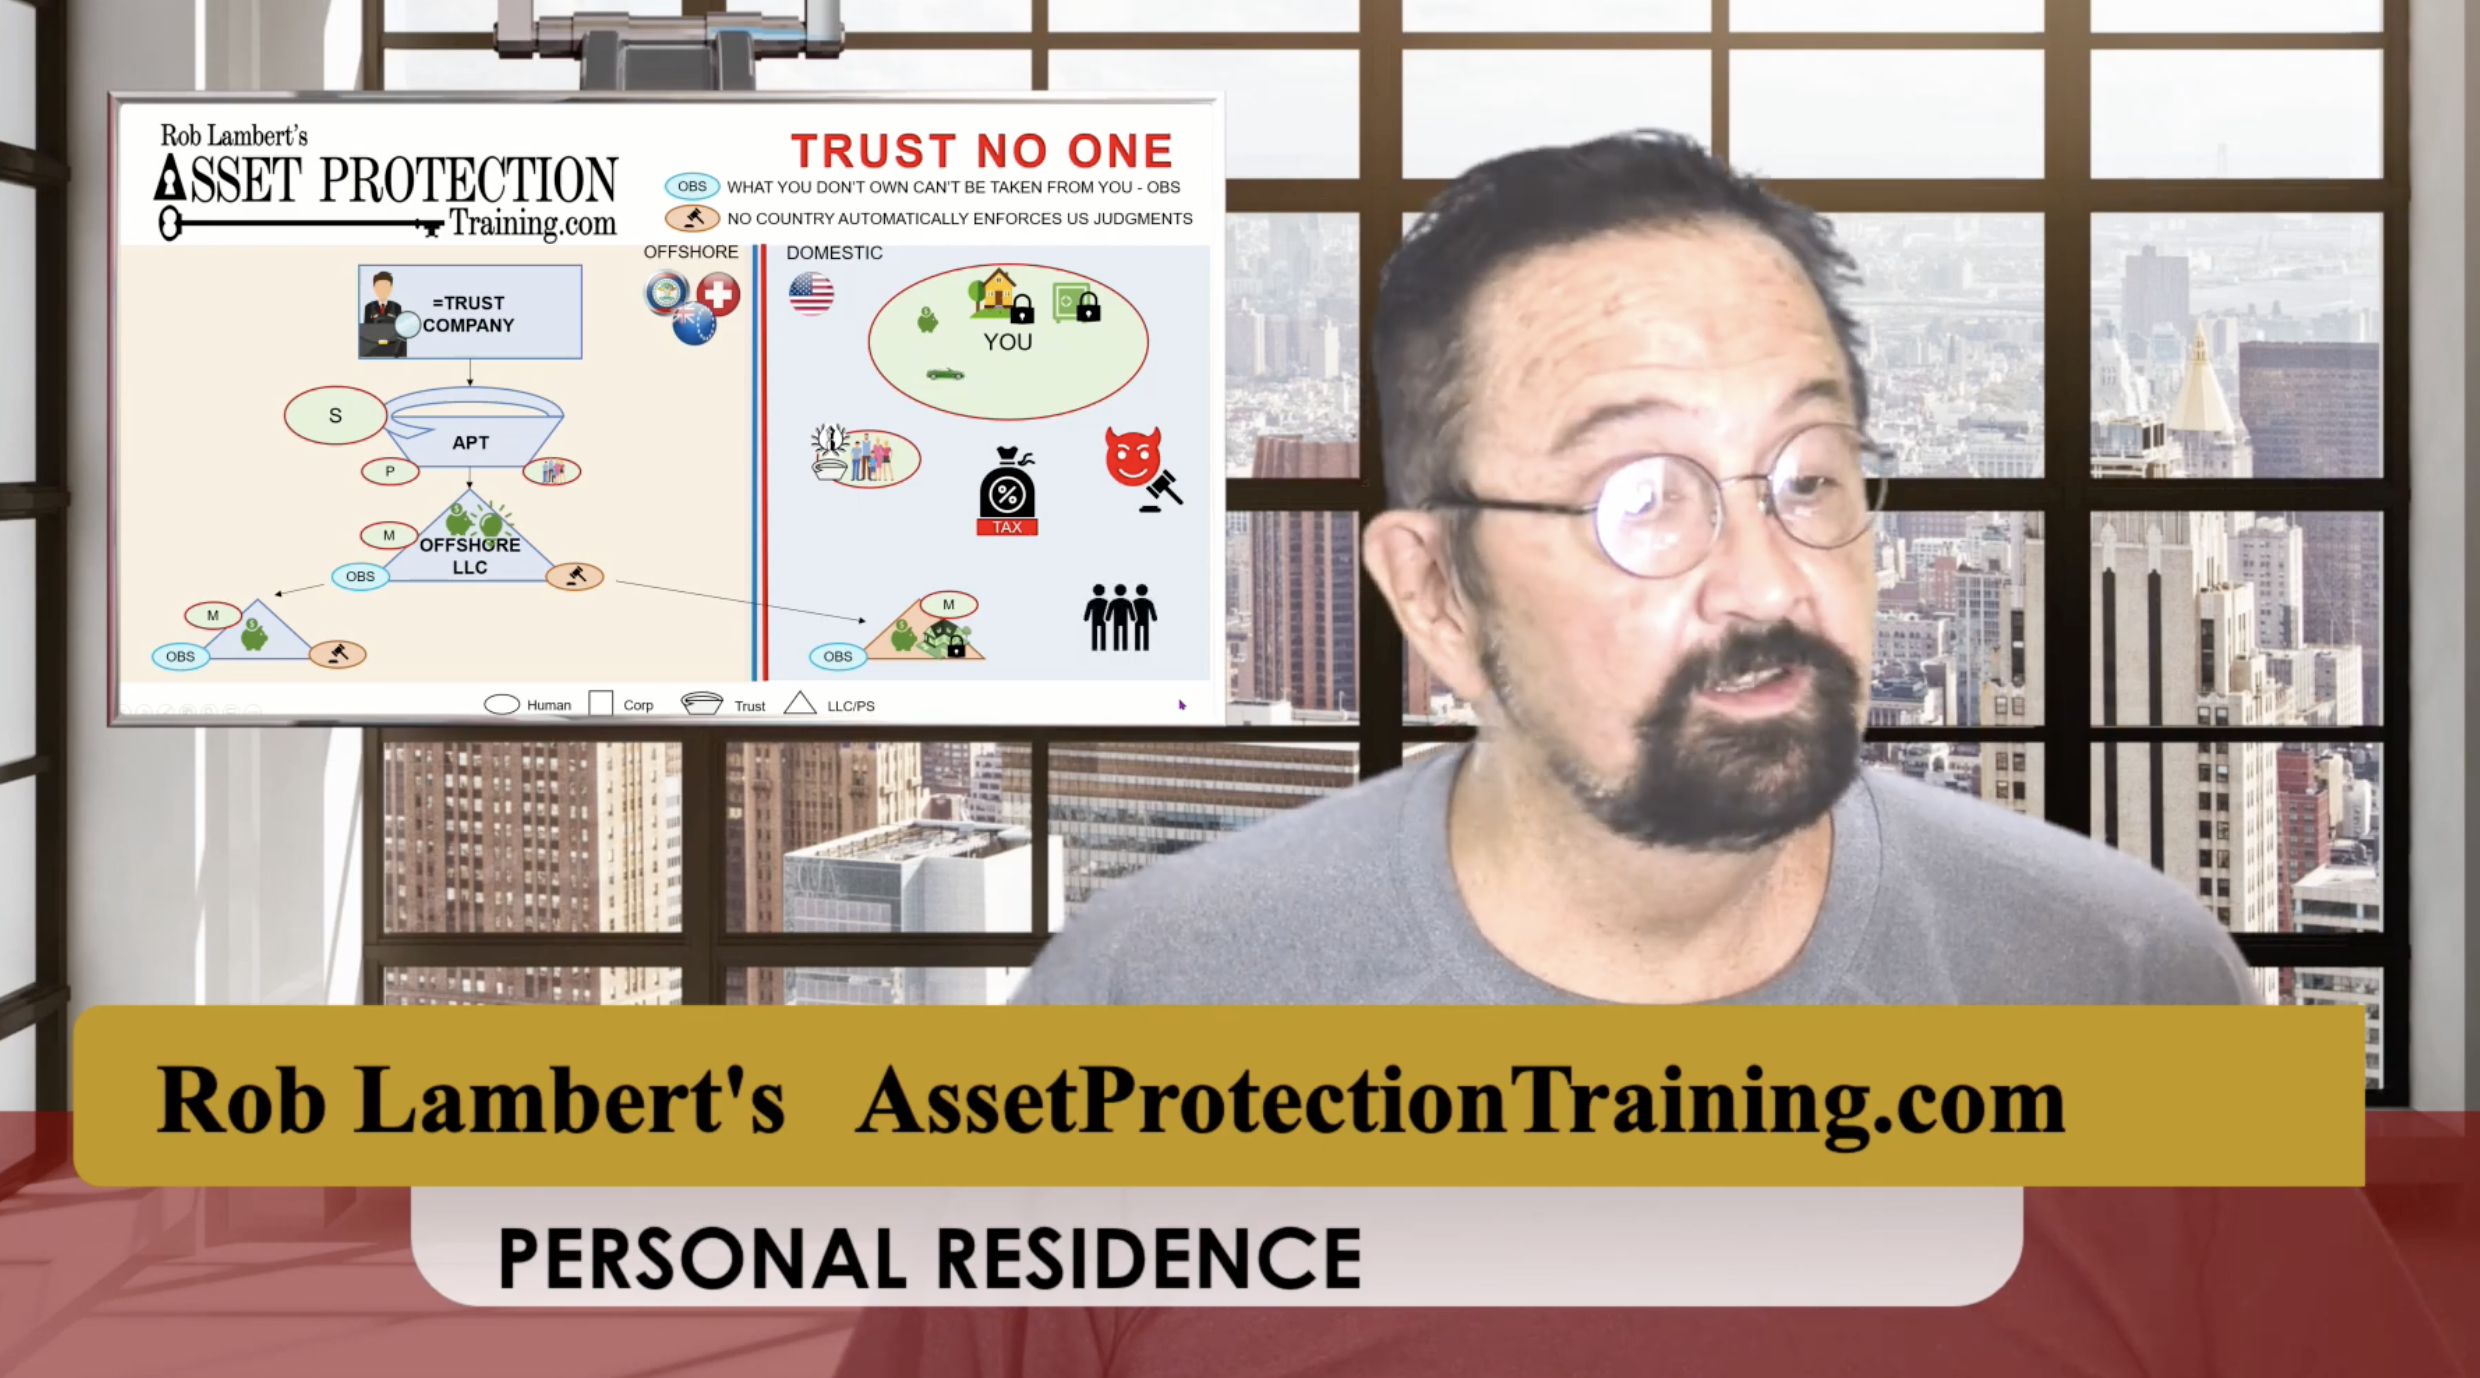 PROTECTING PERSONAL RESIDENCE